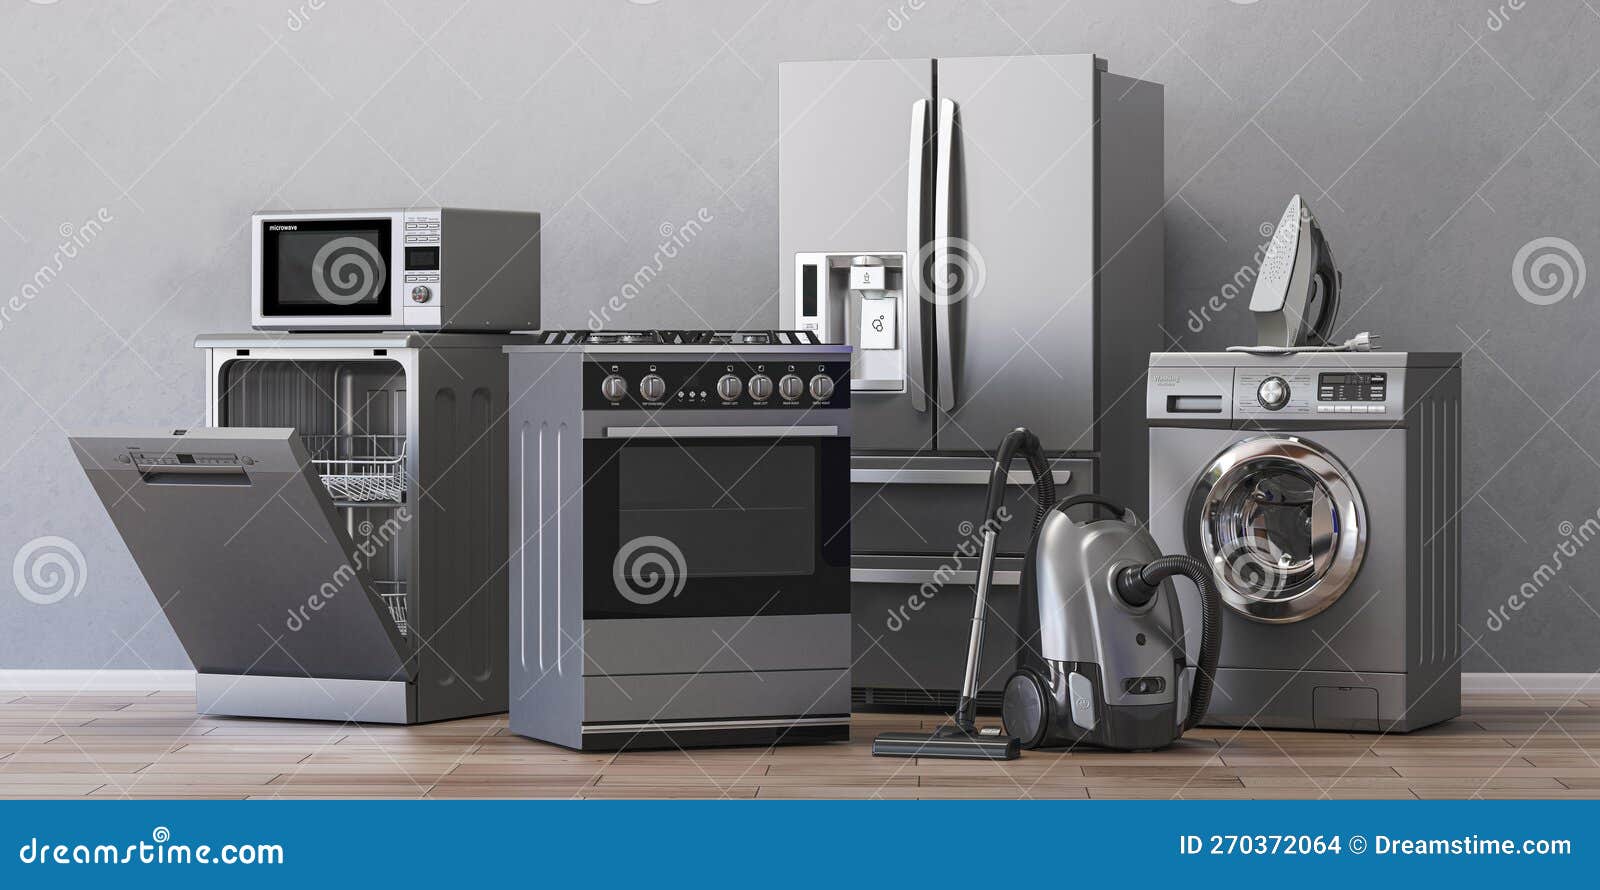 home appliances. household kitchen technics in appartments